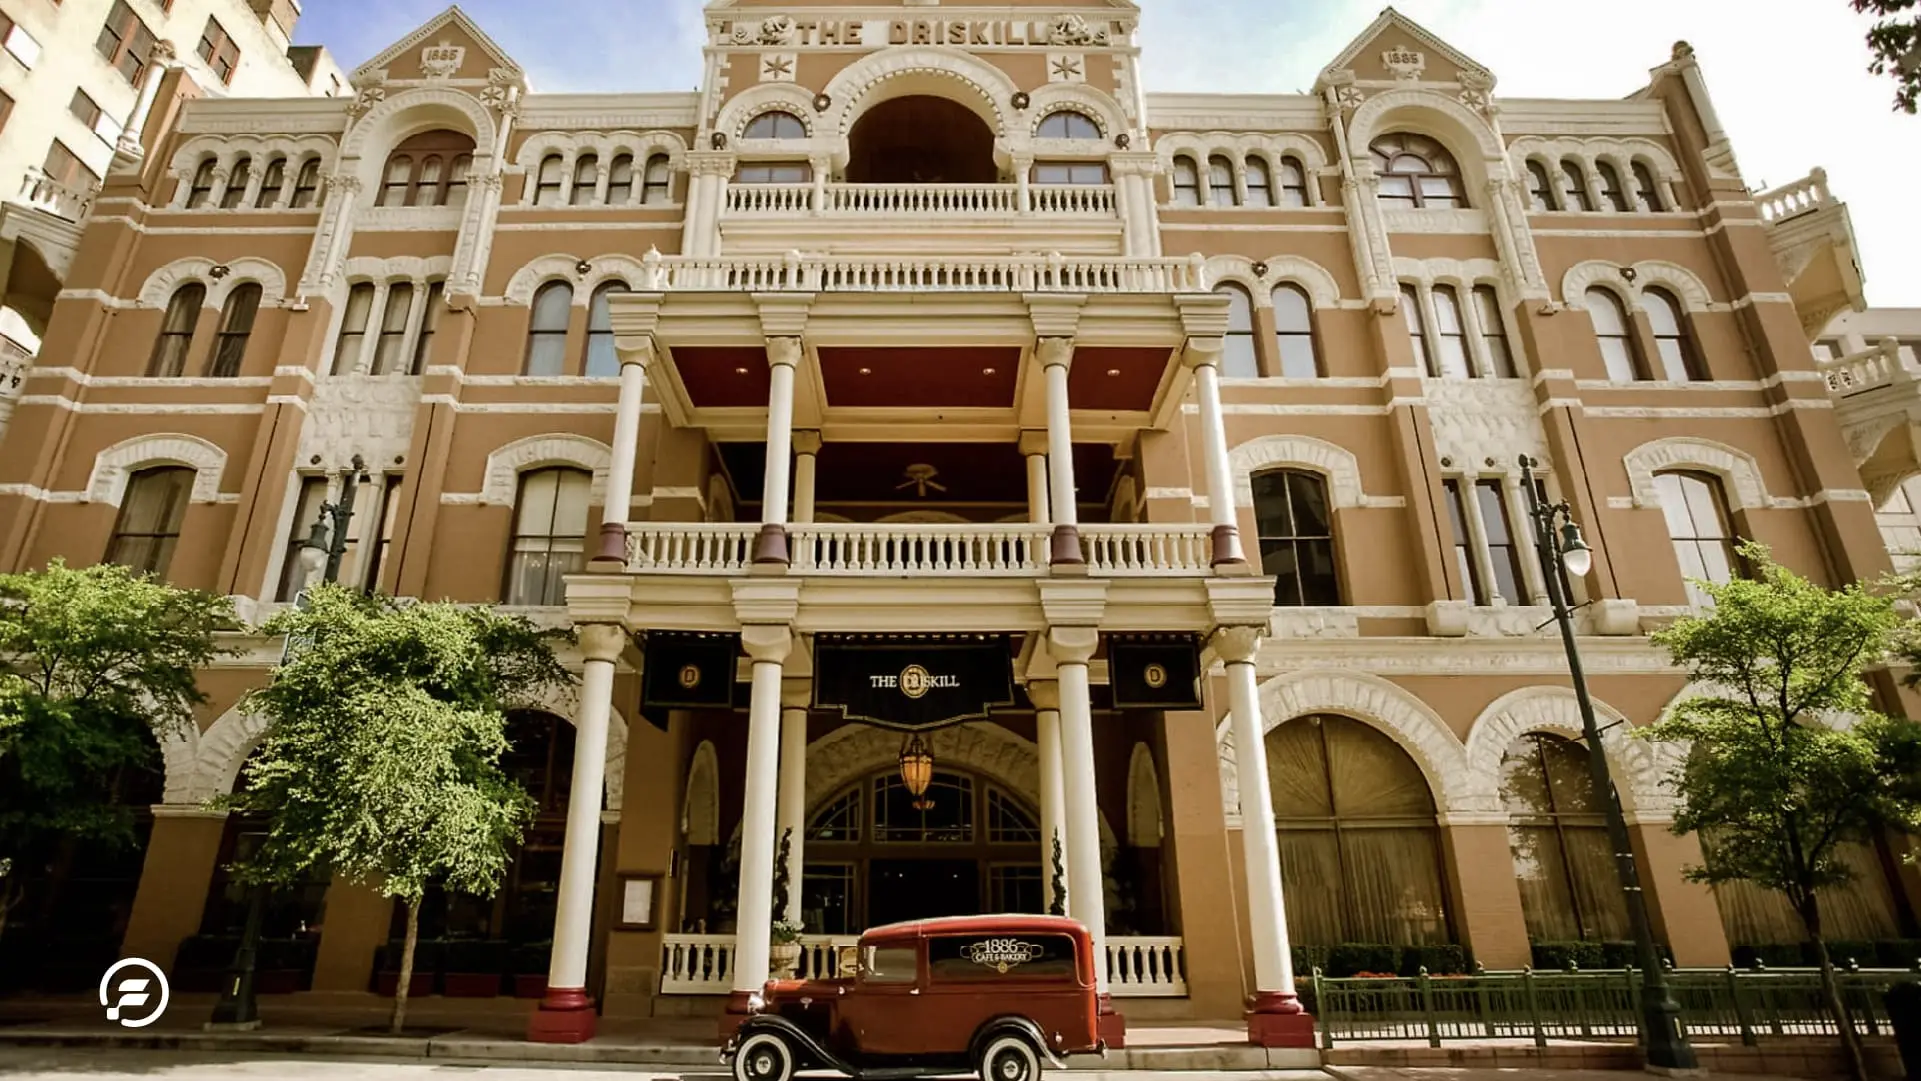 The exterior of the Driskell hotel with an antique car parked outside.